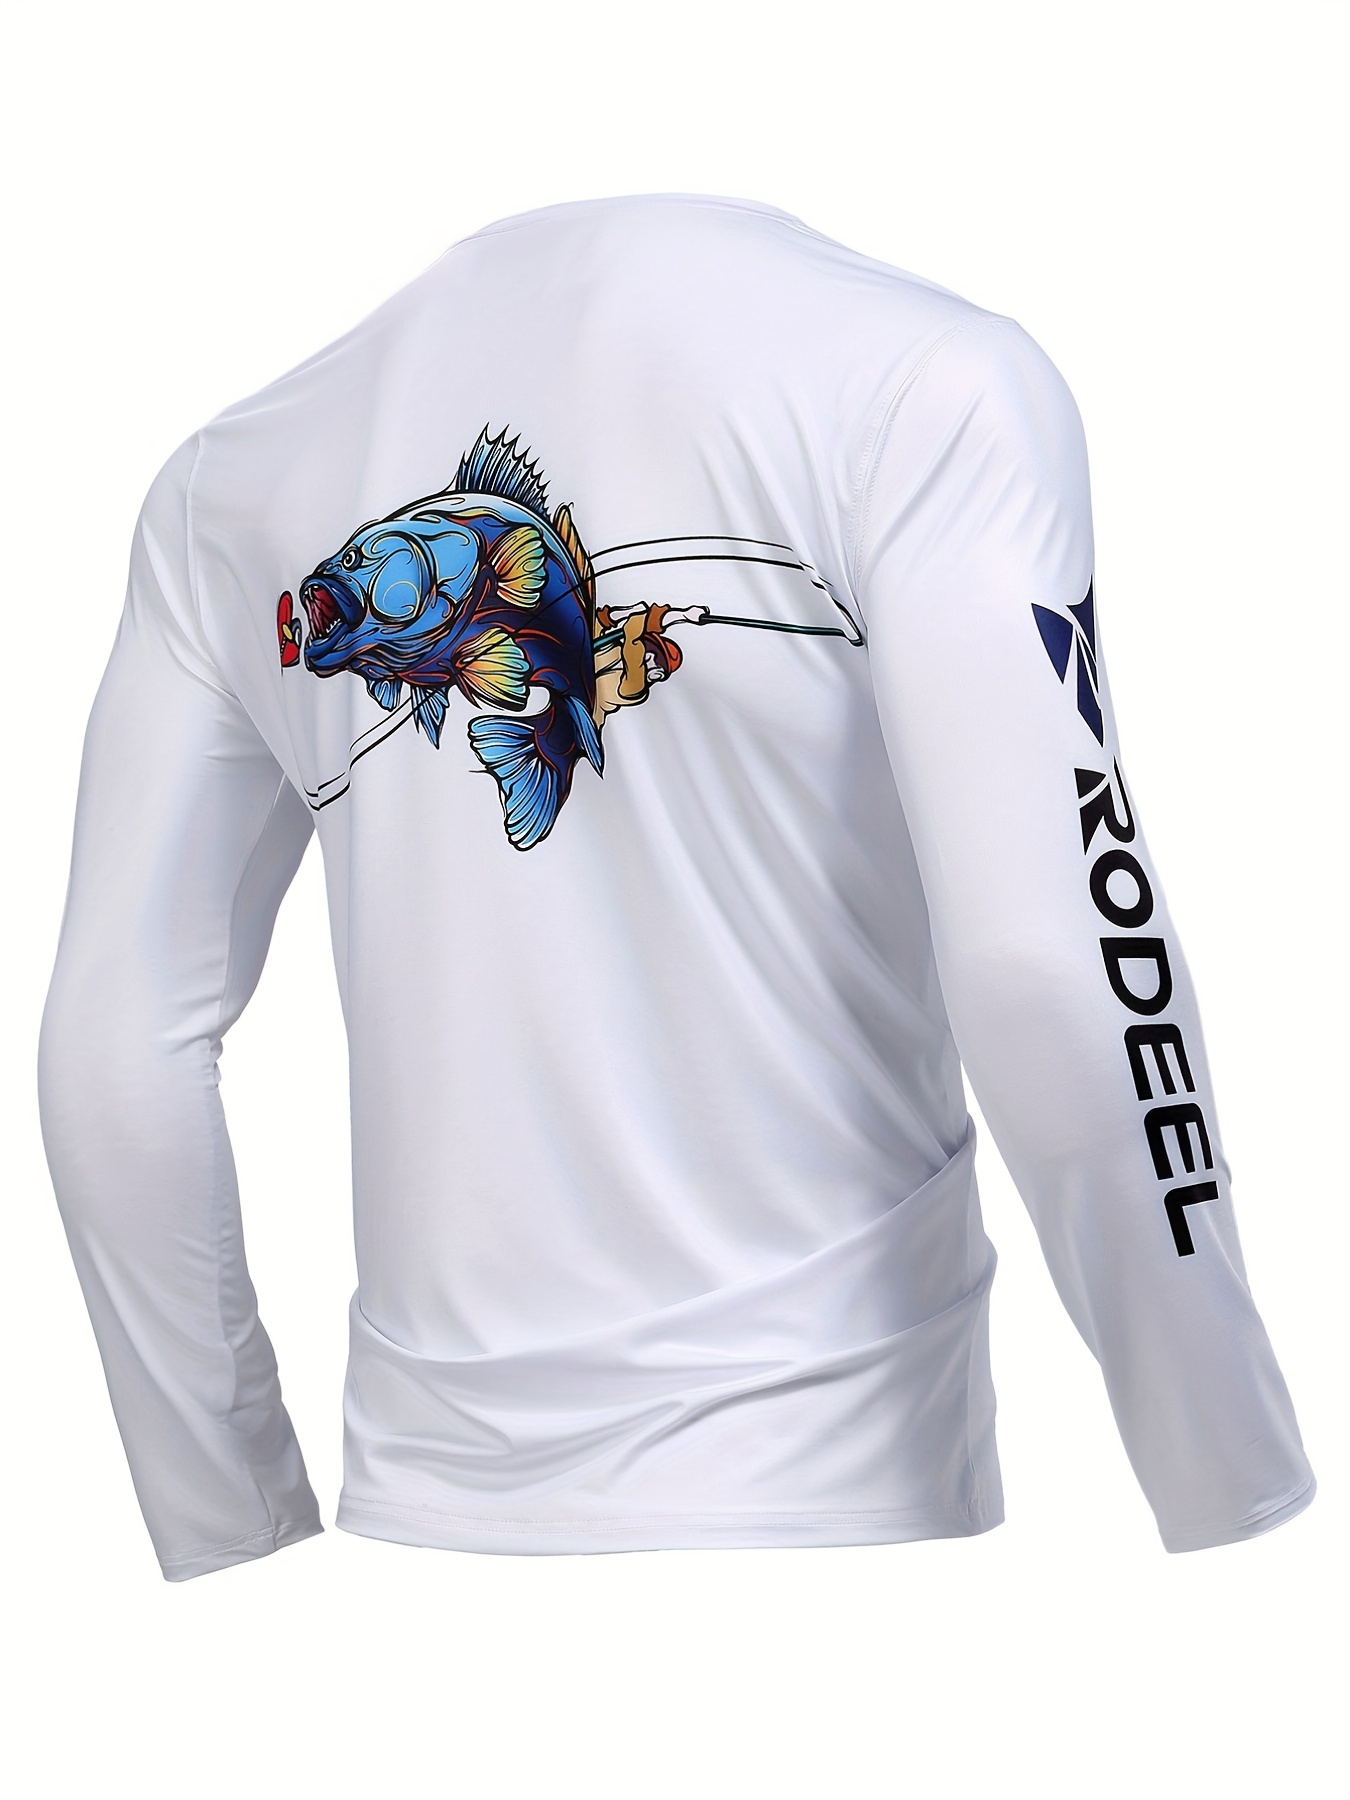 Men's Fishing Shirt With +50 UPF Sun Protection, Breathable Stretchable Long Sleeve Shirt For Men's Fishing Activities